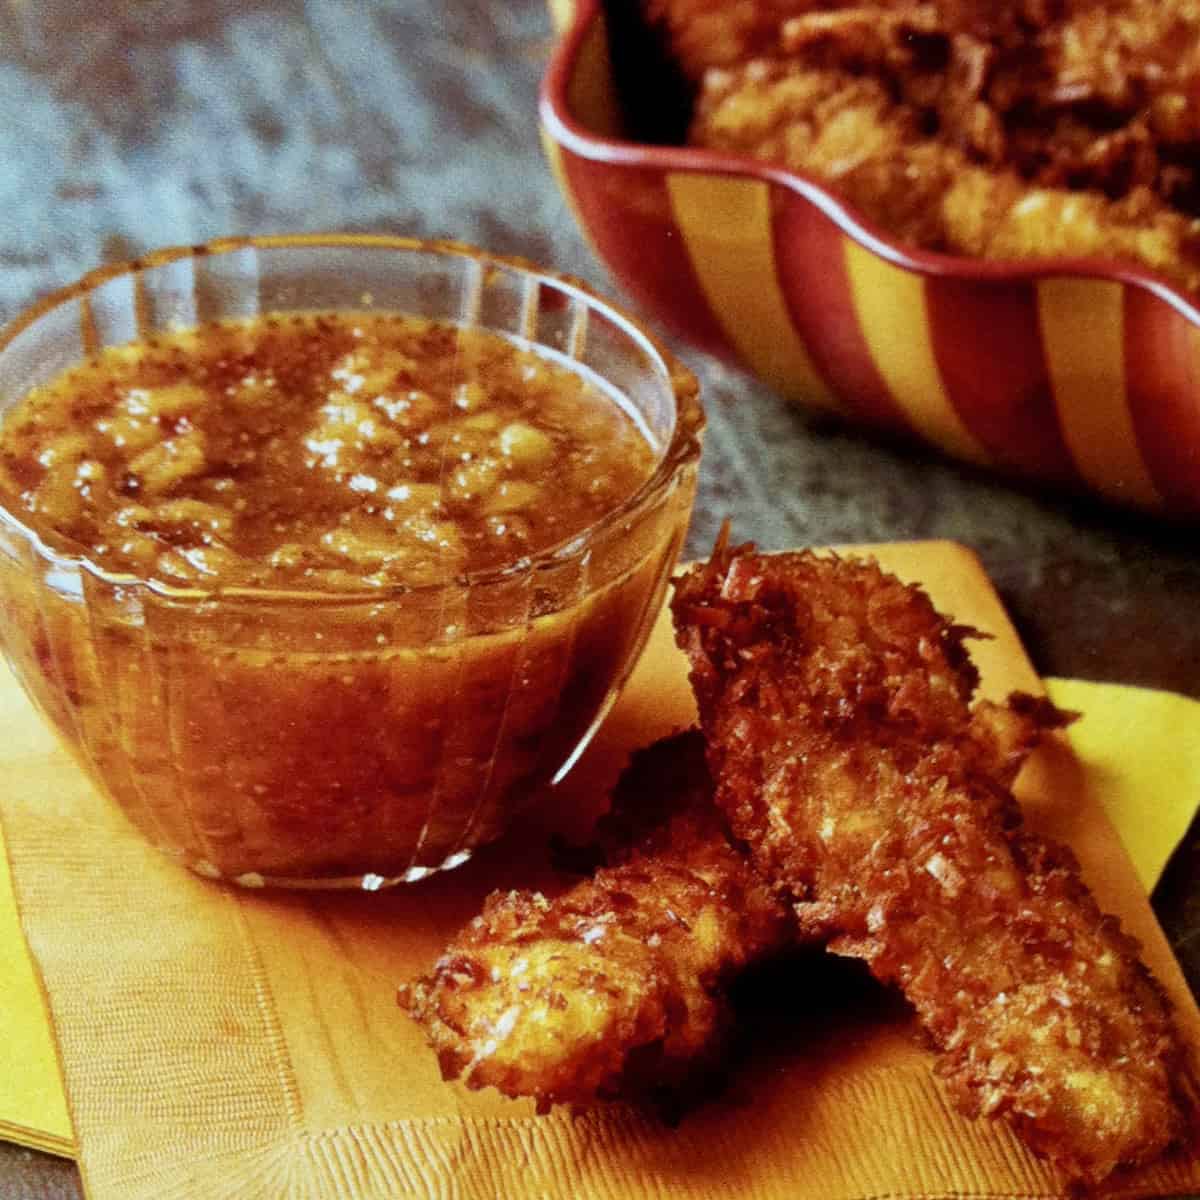 Crispy coconut chicken dippers with dipping sauce.